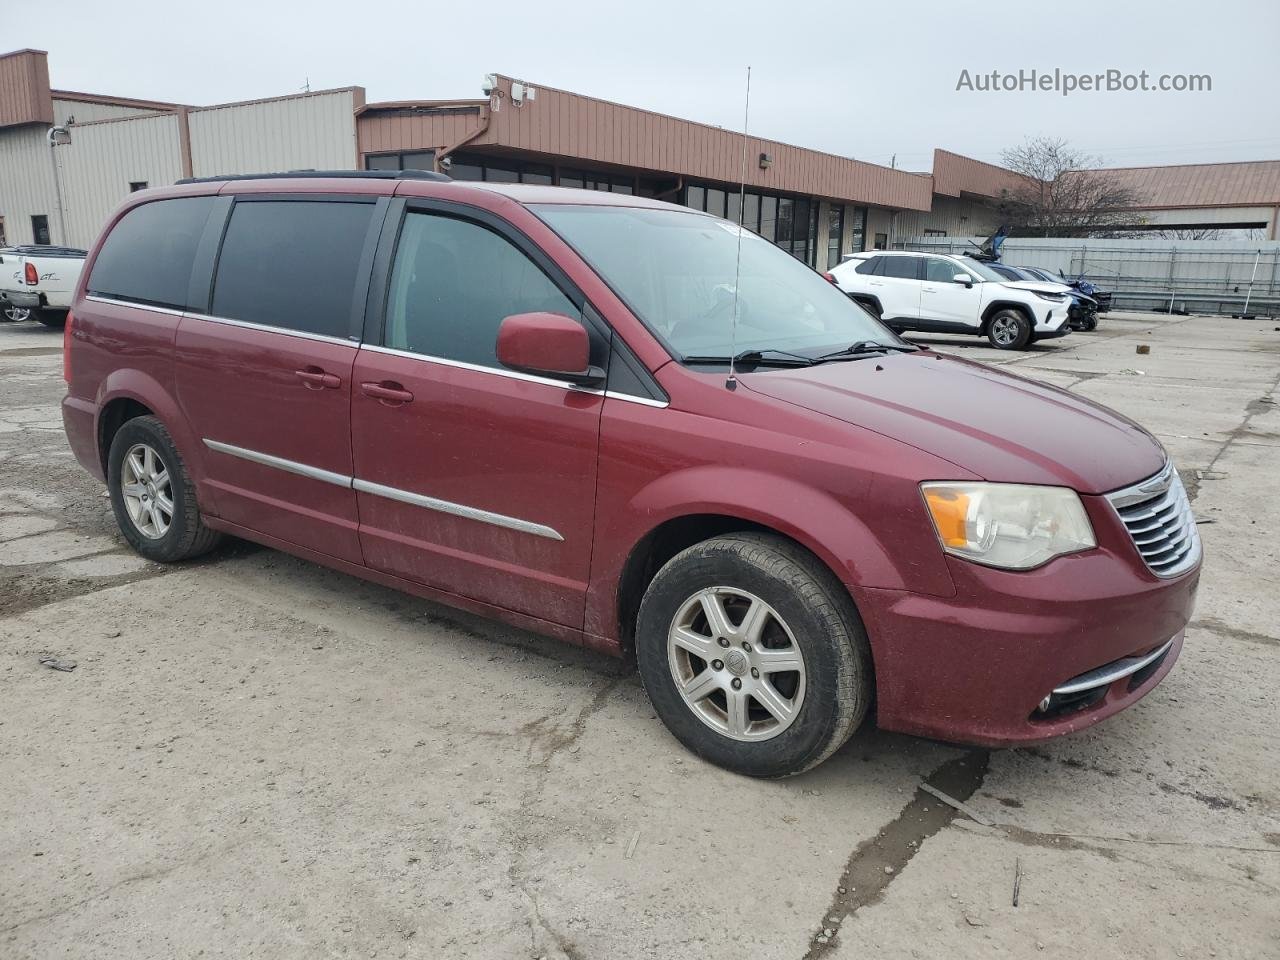 2011 Chrysler Town & Country Touring Бордовый vin: 2A4RR5DG8BR607350